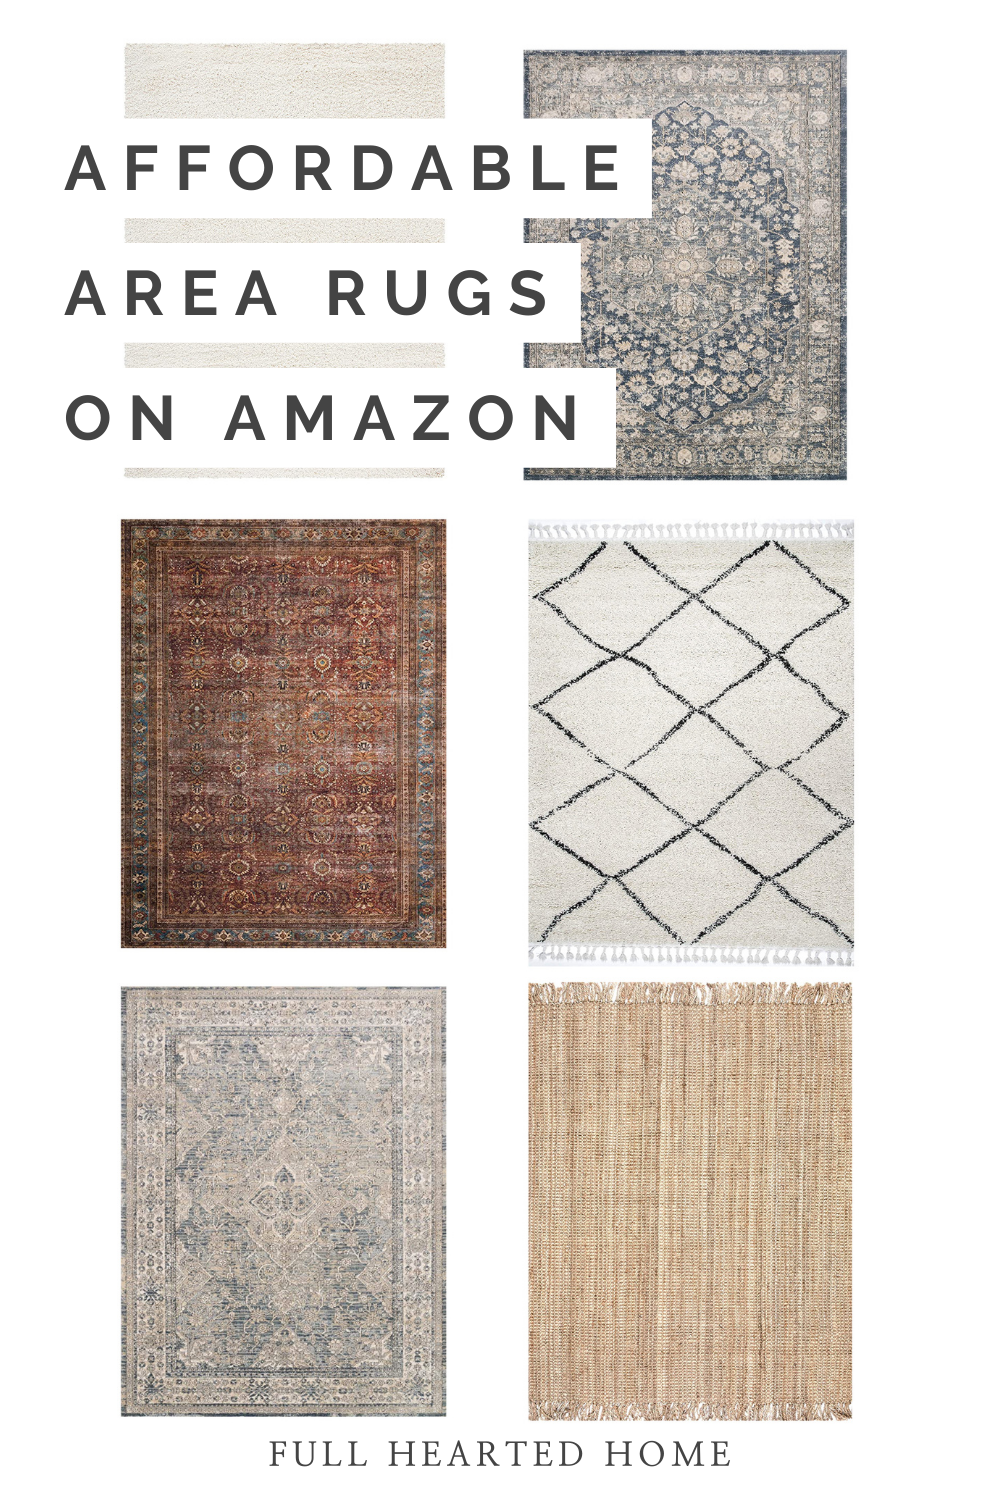 Affordable Area Rugs on Amazon